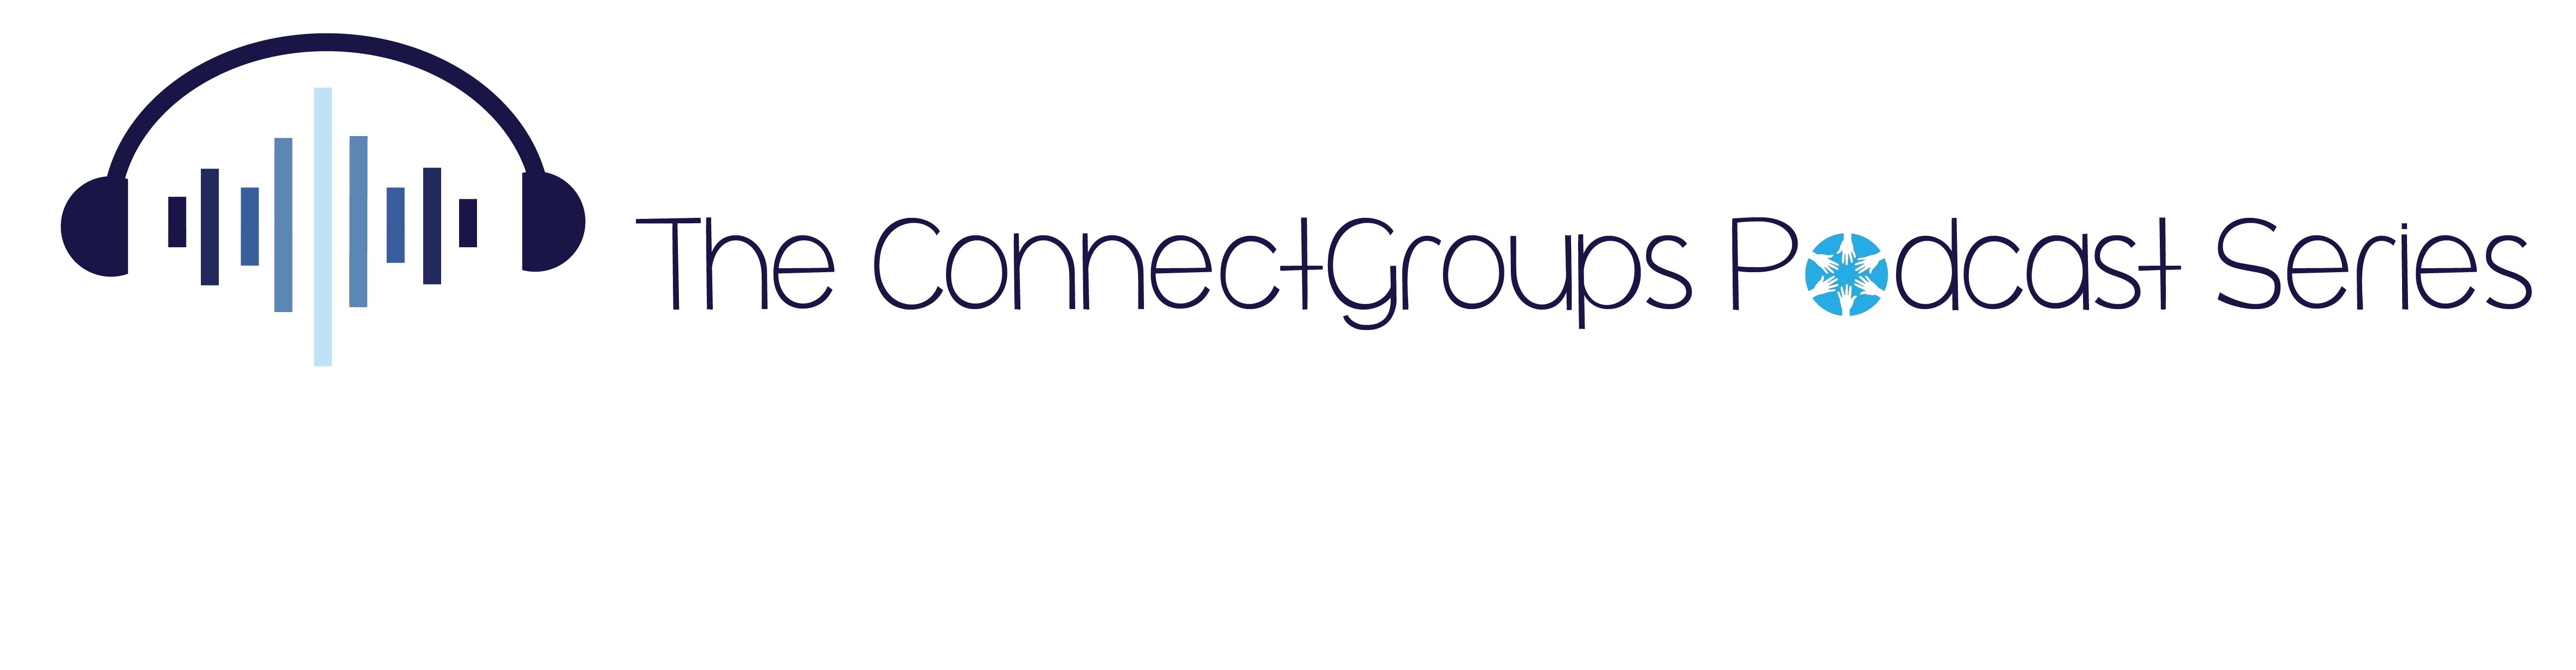 The ConnectGroups Podcast Series